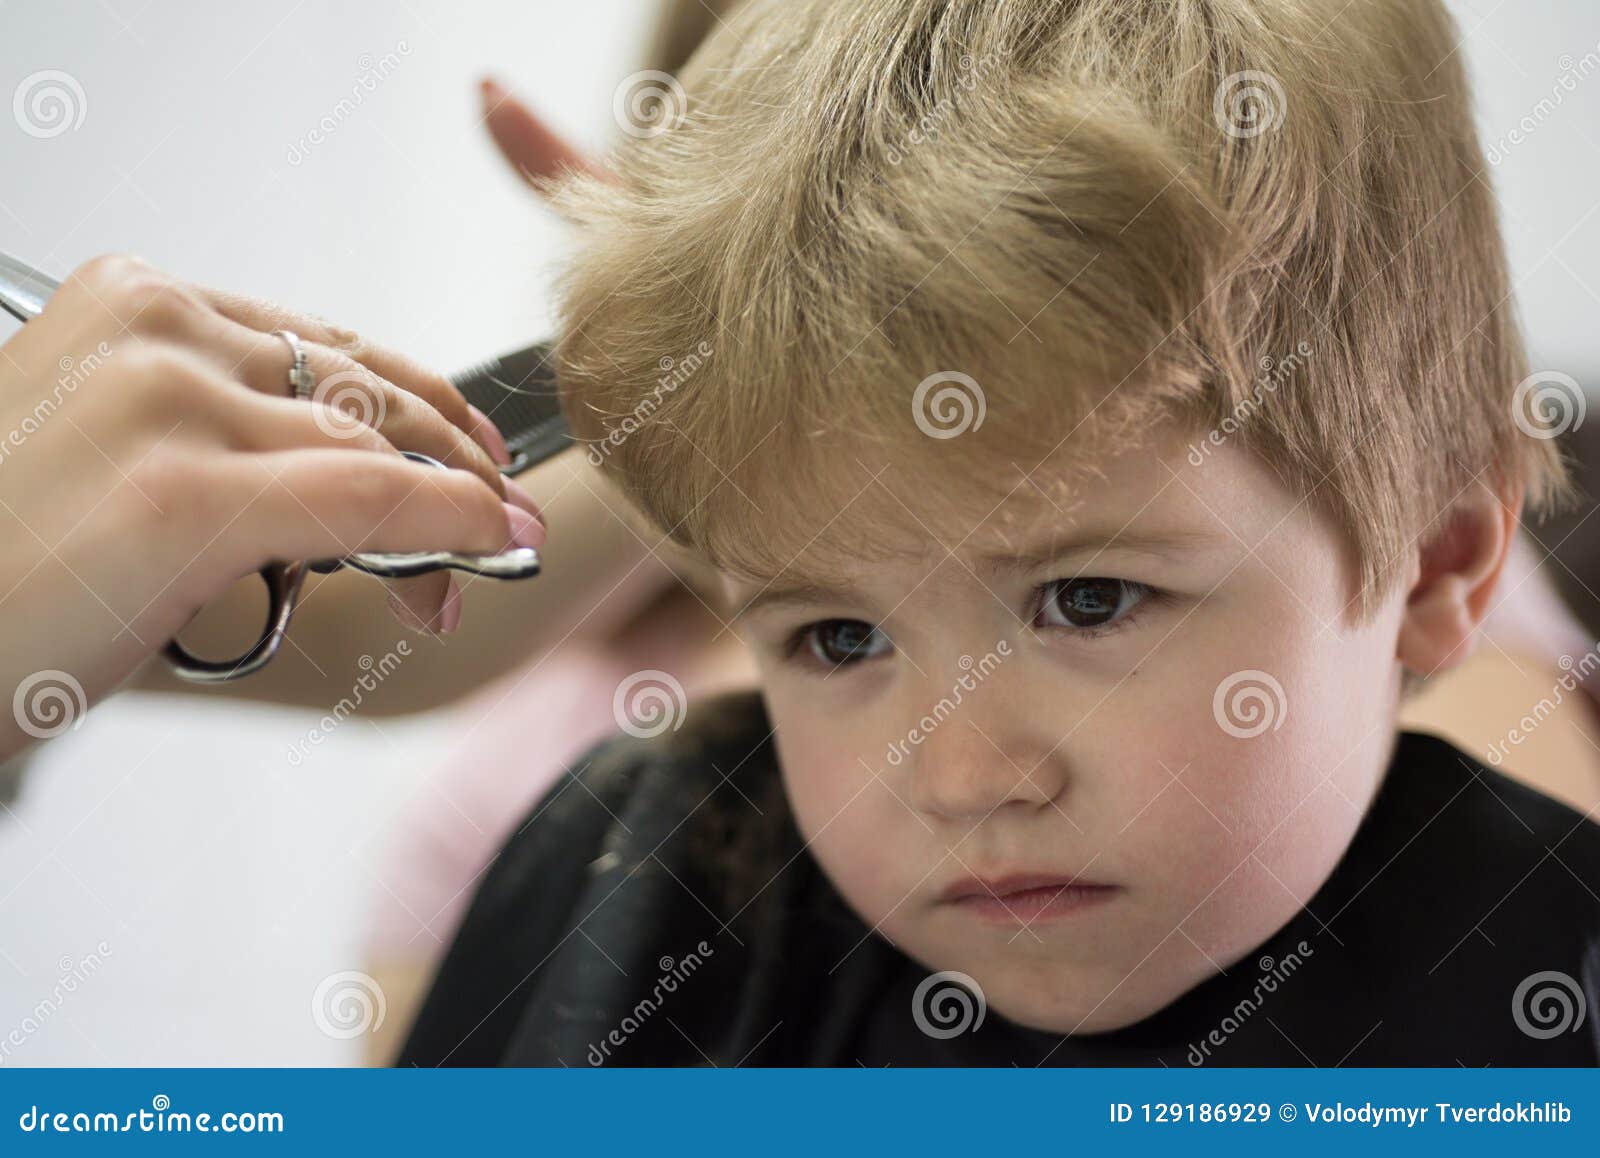 Professional Styling Cute Boys Hairstyle Little Child